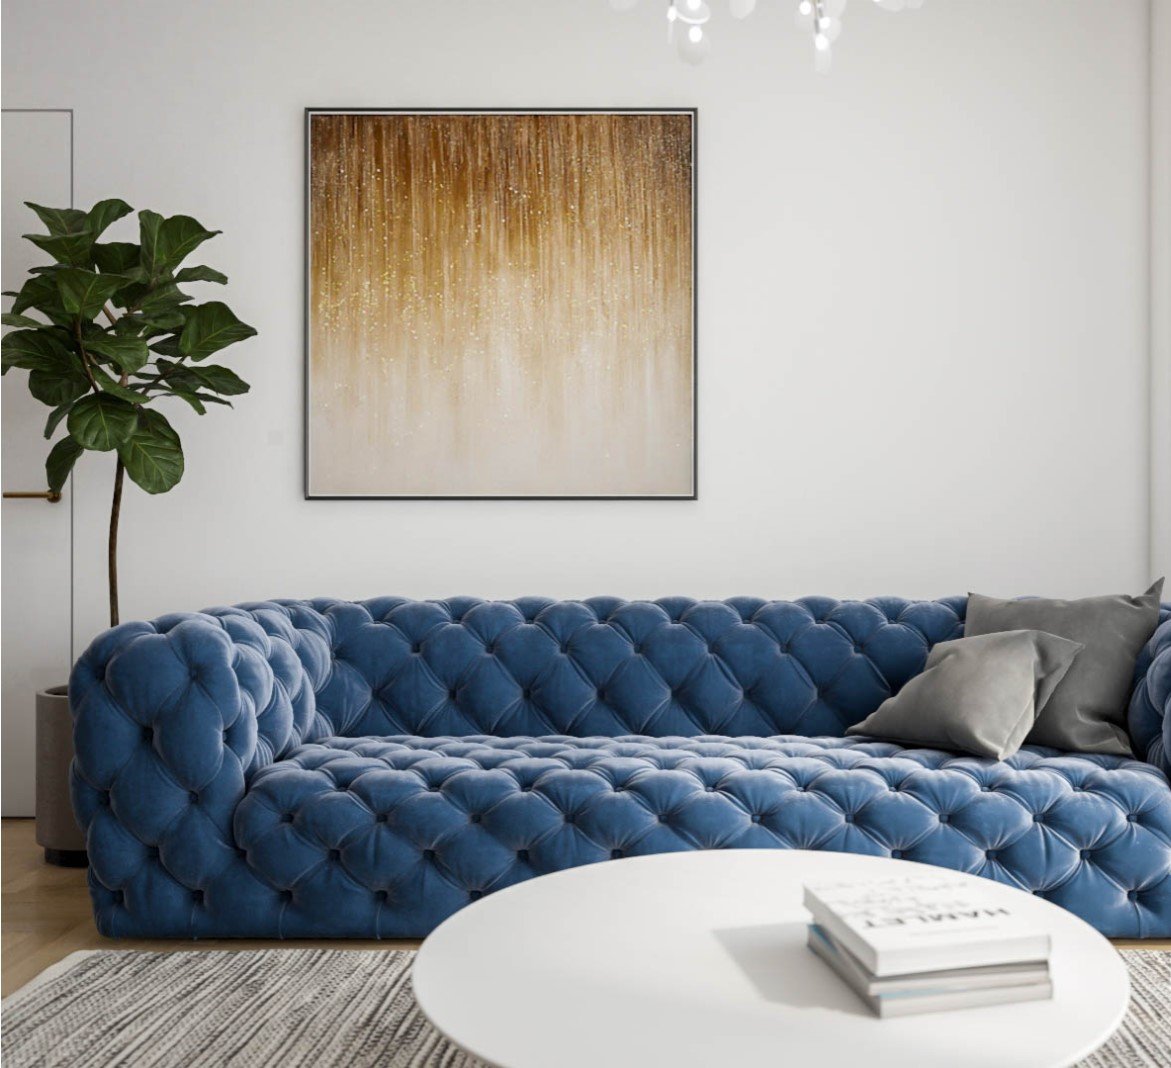 Home renovation showcasing a luxurious blue tufted sofa, an elegant gold and white wall art, alongside a lush green potted plant in a modern living room setting.